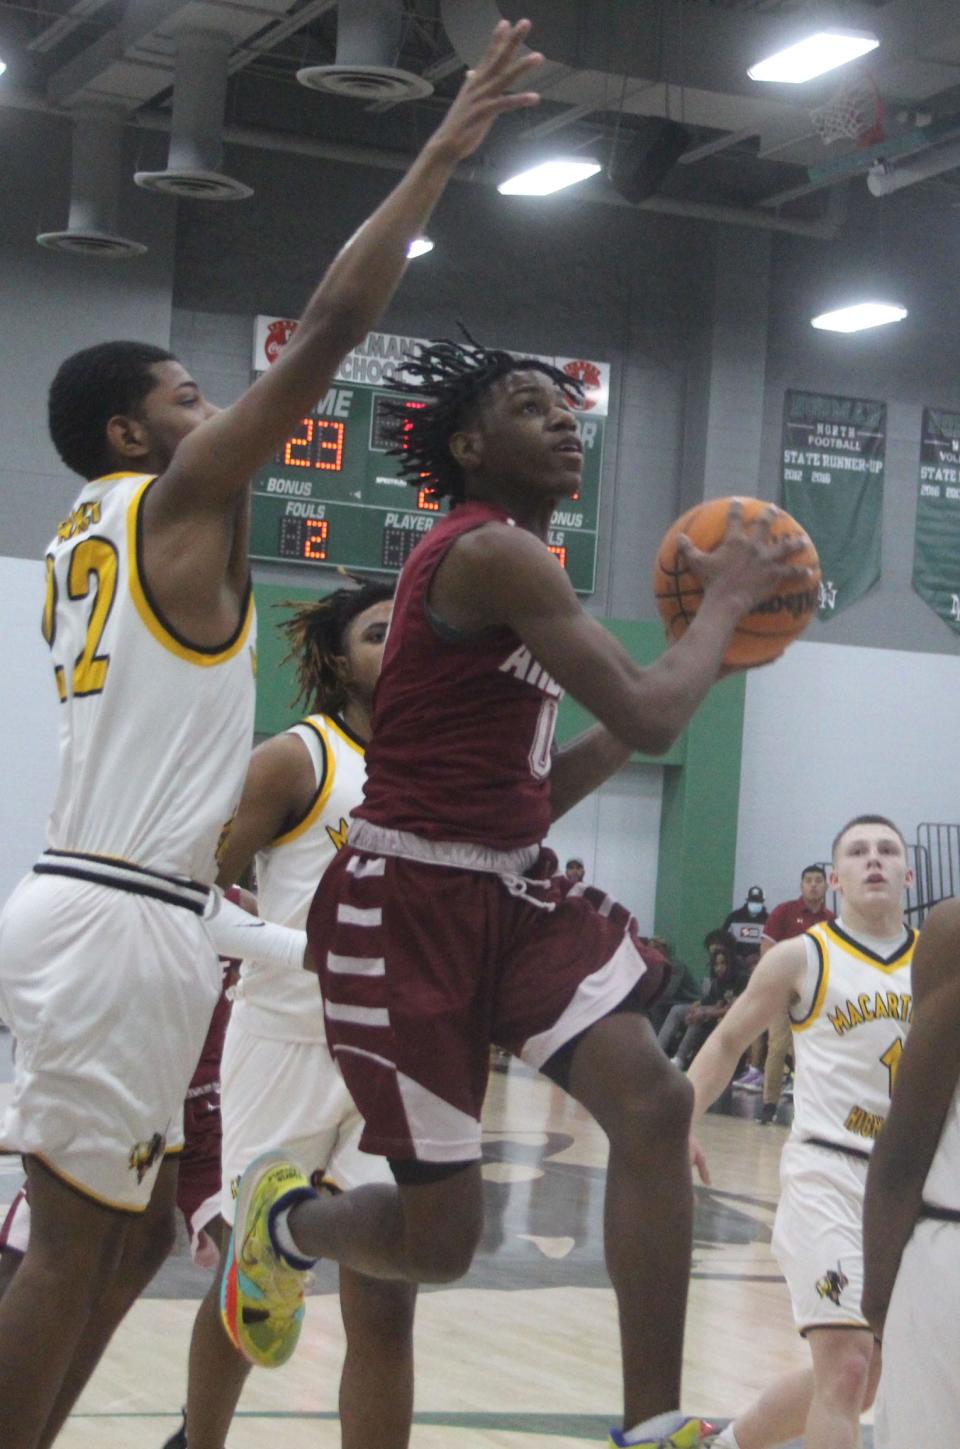 Ardmore's DD Coleman drives to the basket earlier this season. The senior led the Tigers with 24 points on Friday in a 66-59 loss to Southmoore in the semifinals of the John Nobles Invitational.